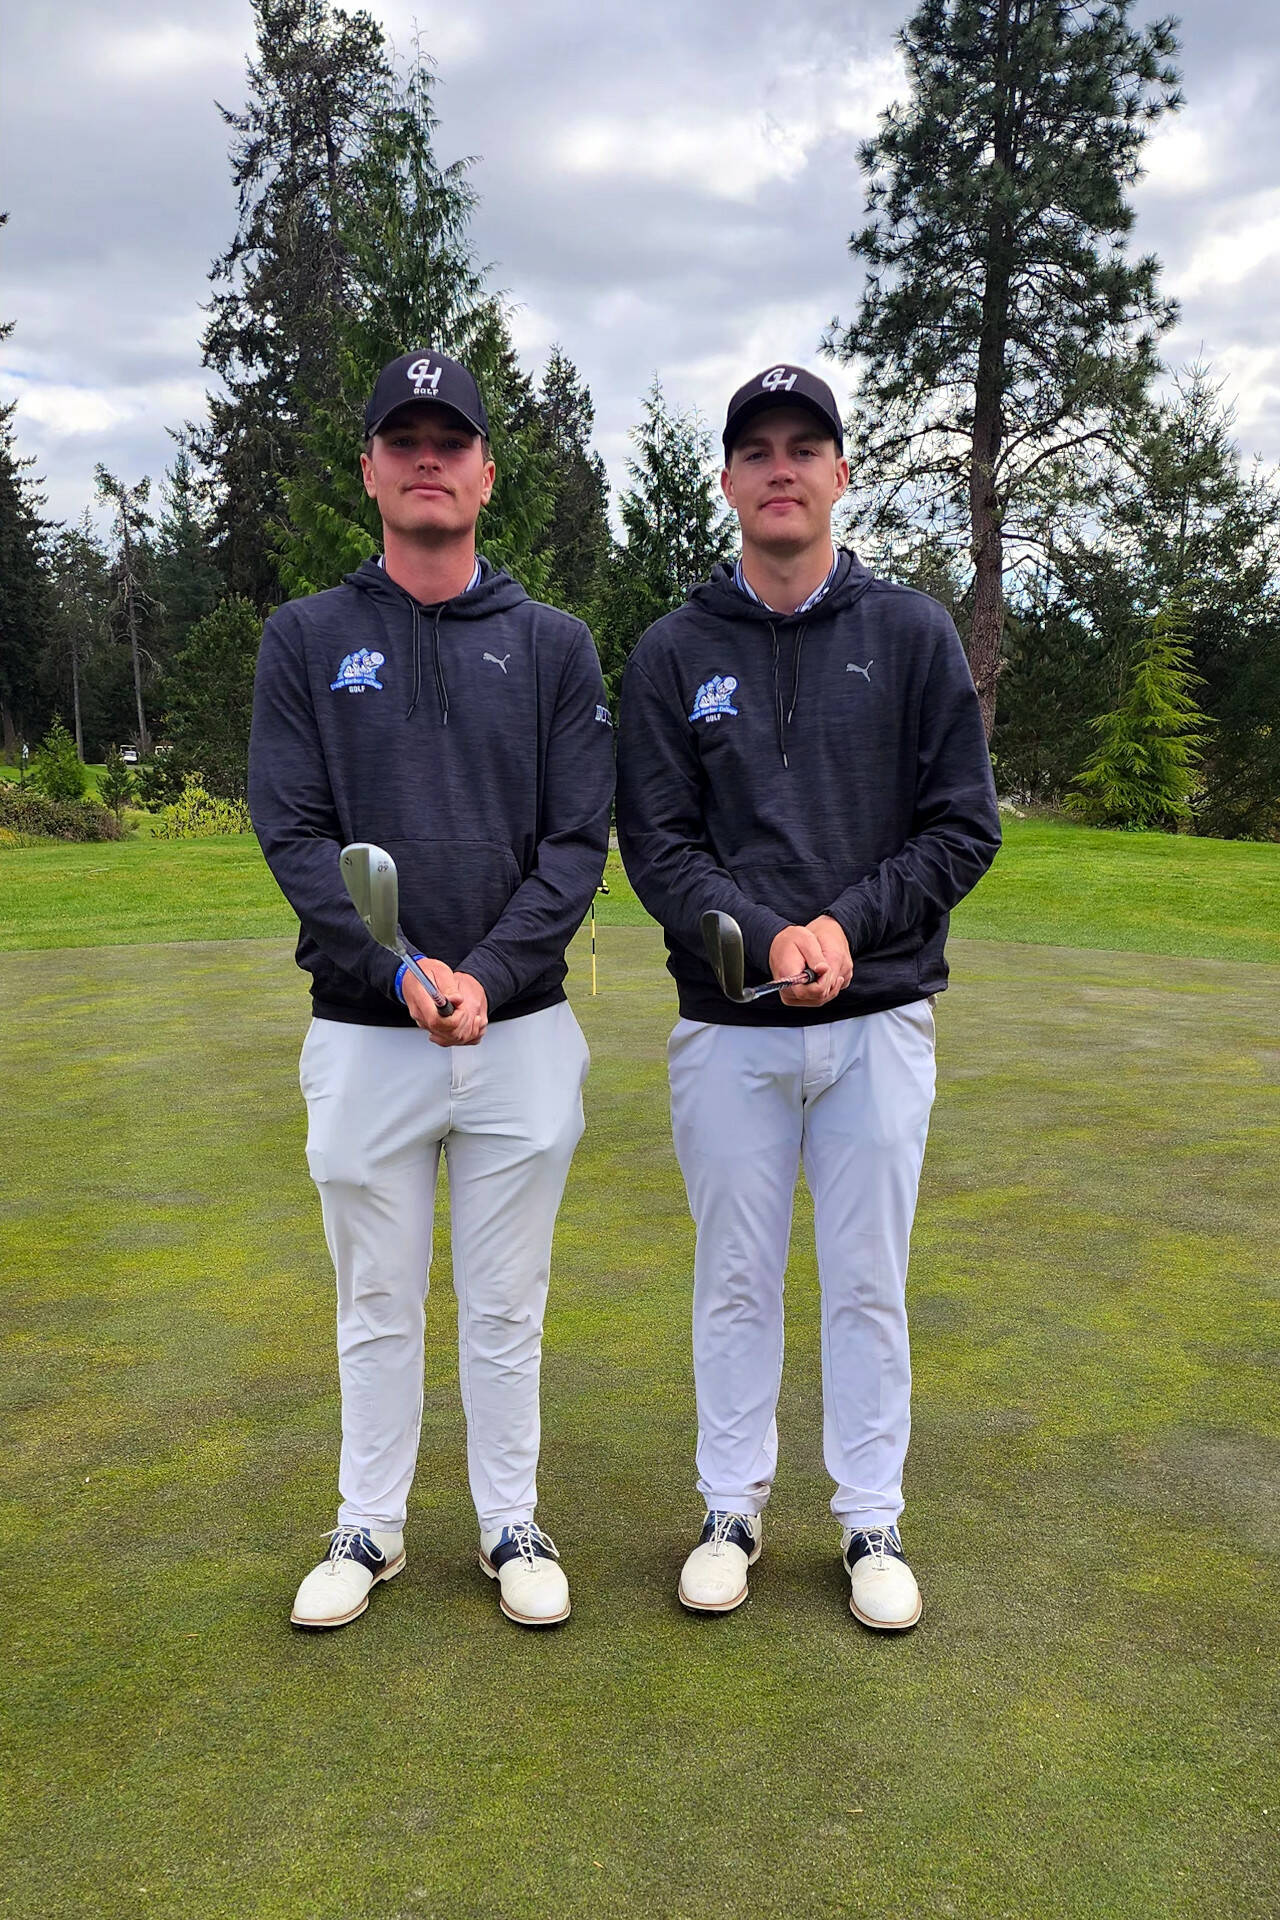 SUBMITTED PHOTO Grays Harbor College golfers Brett (left) and Cole Wasson led the Chokers to a fifth-place finish at an NWAC conference meet on Sunday and Monday in Port Orchard.